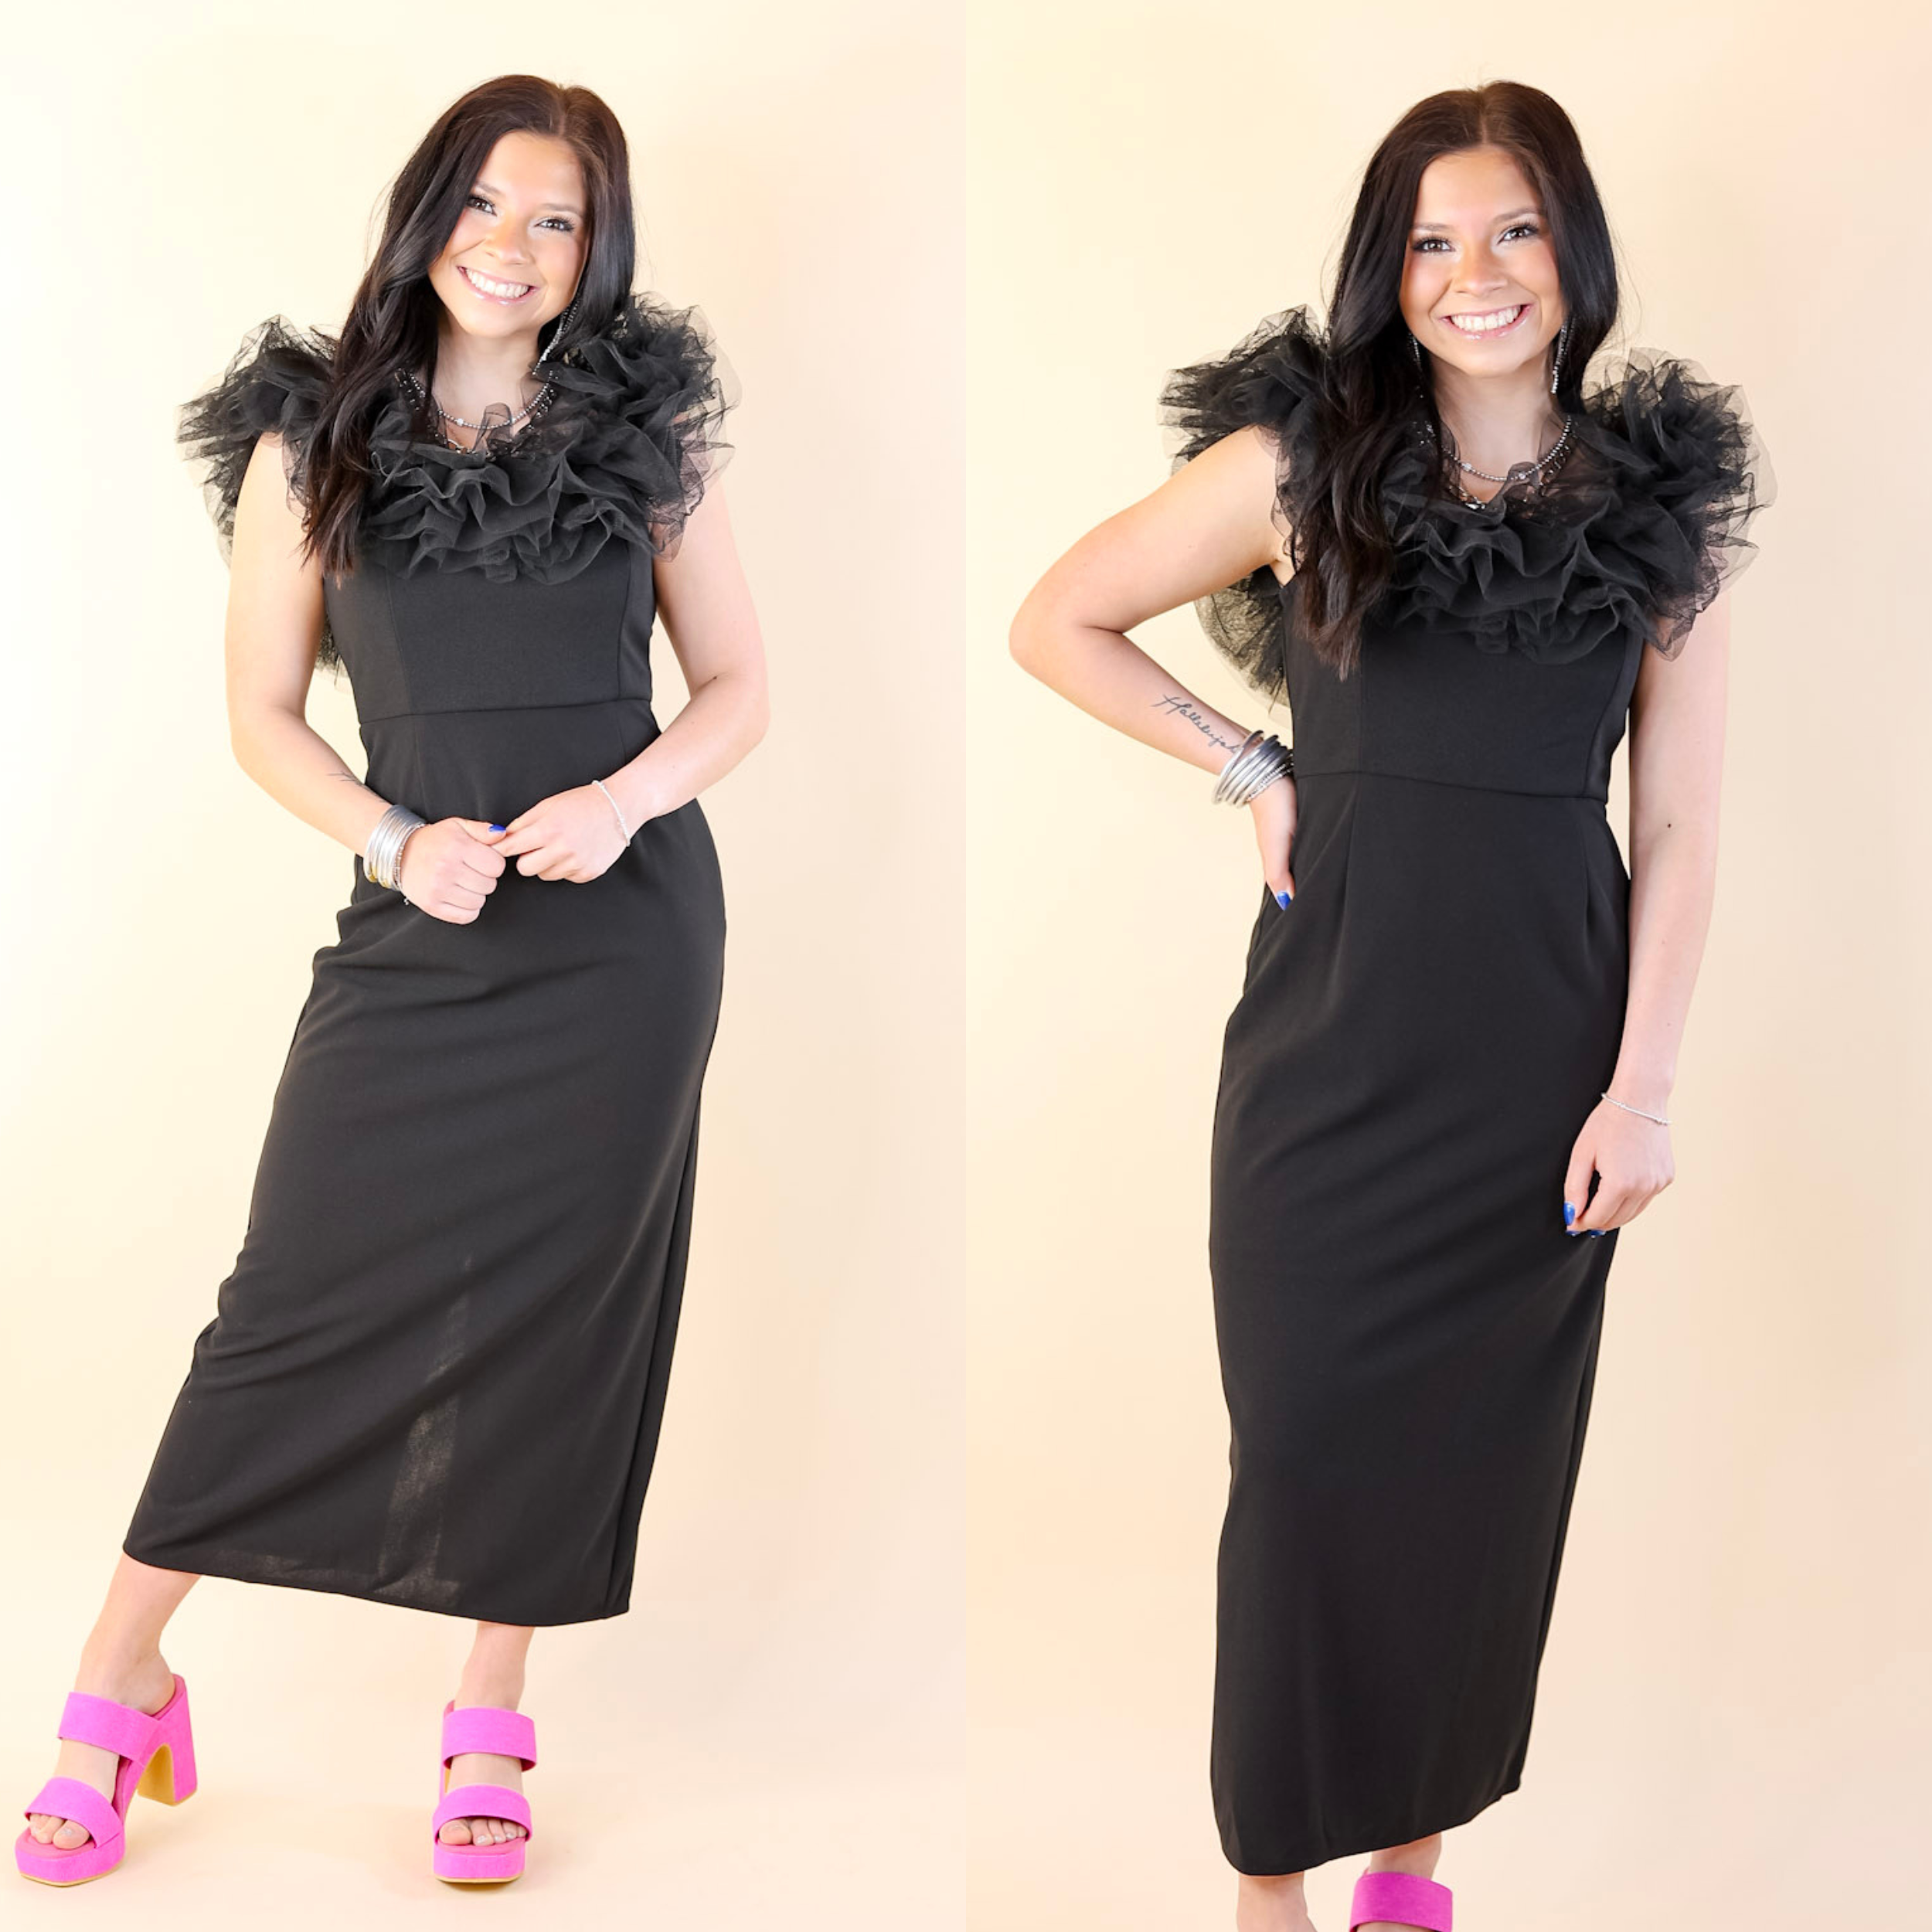 Radiating Confidence Off the Shoulder Tulle Dress in Black - Giddy Up Glamour Boutique